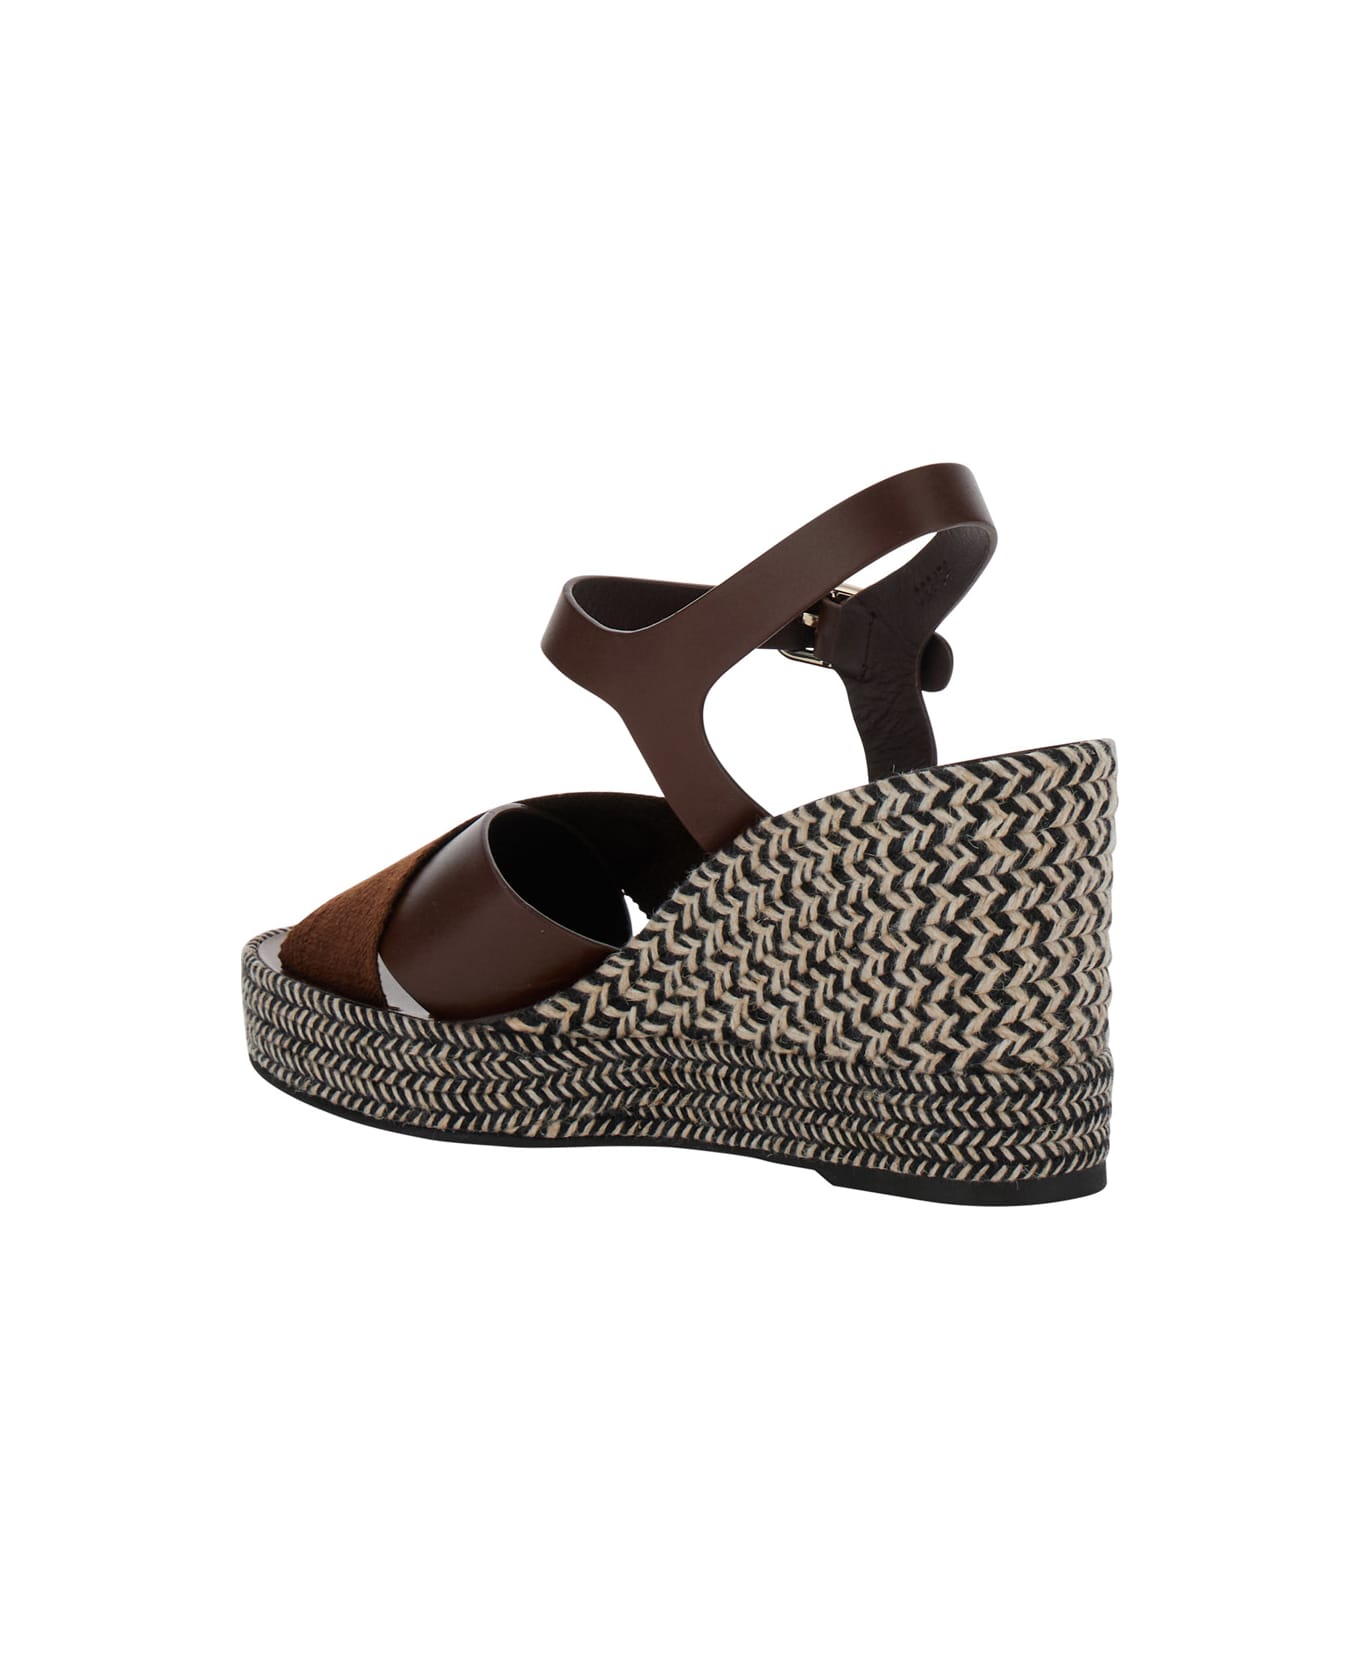 Chloé 'piia' Brown Espadrillas Sandals With Wedge In Leather And Jute Woman - Brown